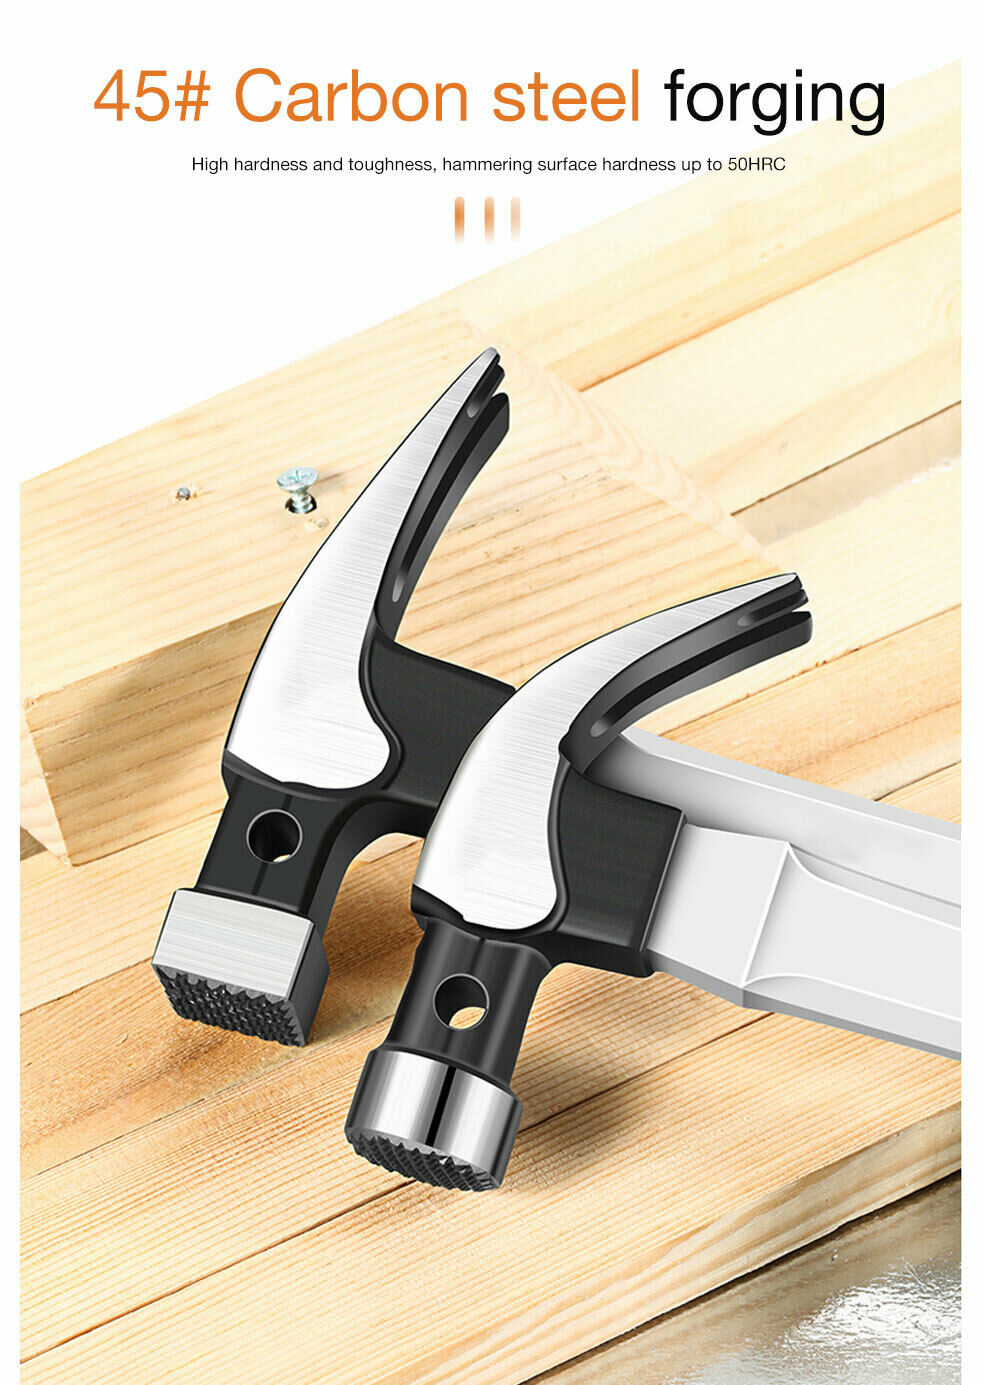 Magnetic Automatic Nail Hammer - Sale ends today! - Laric